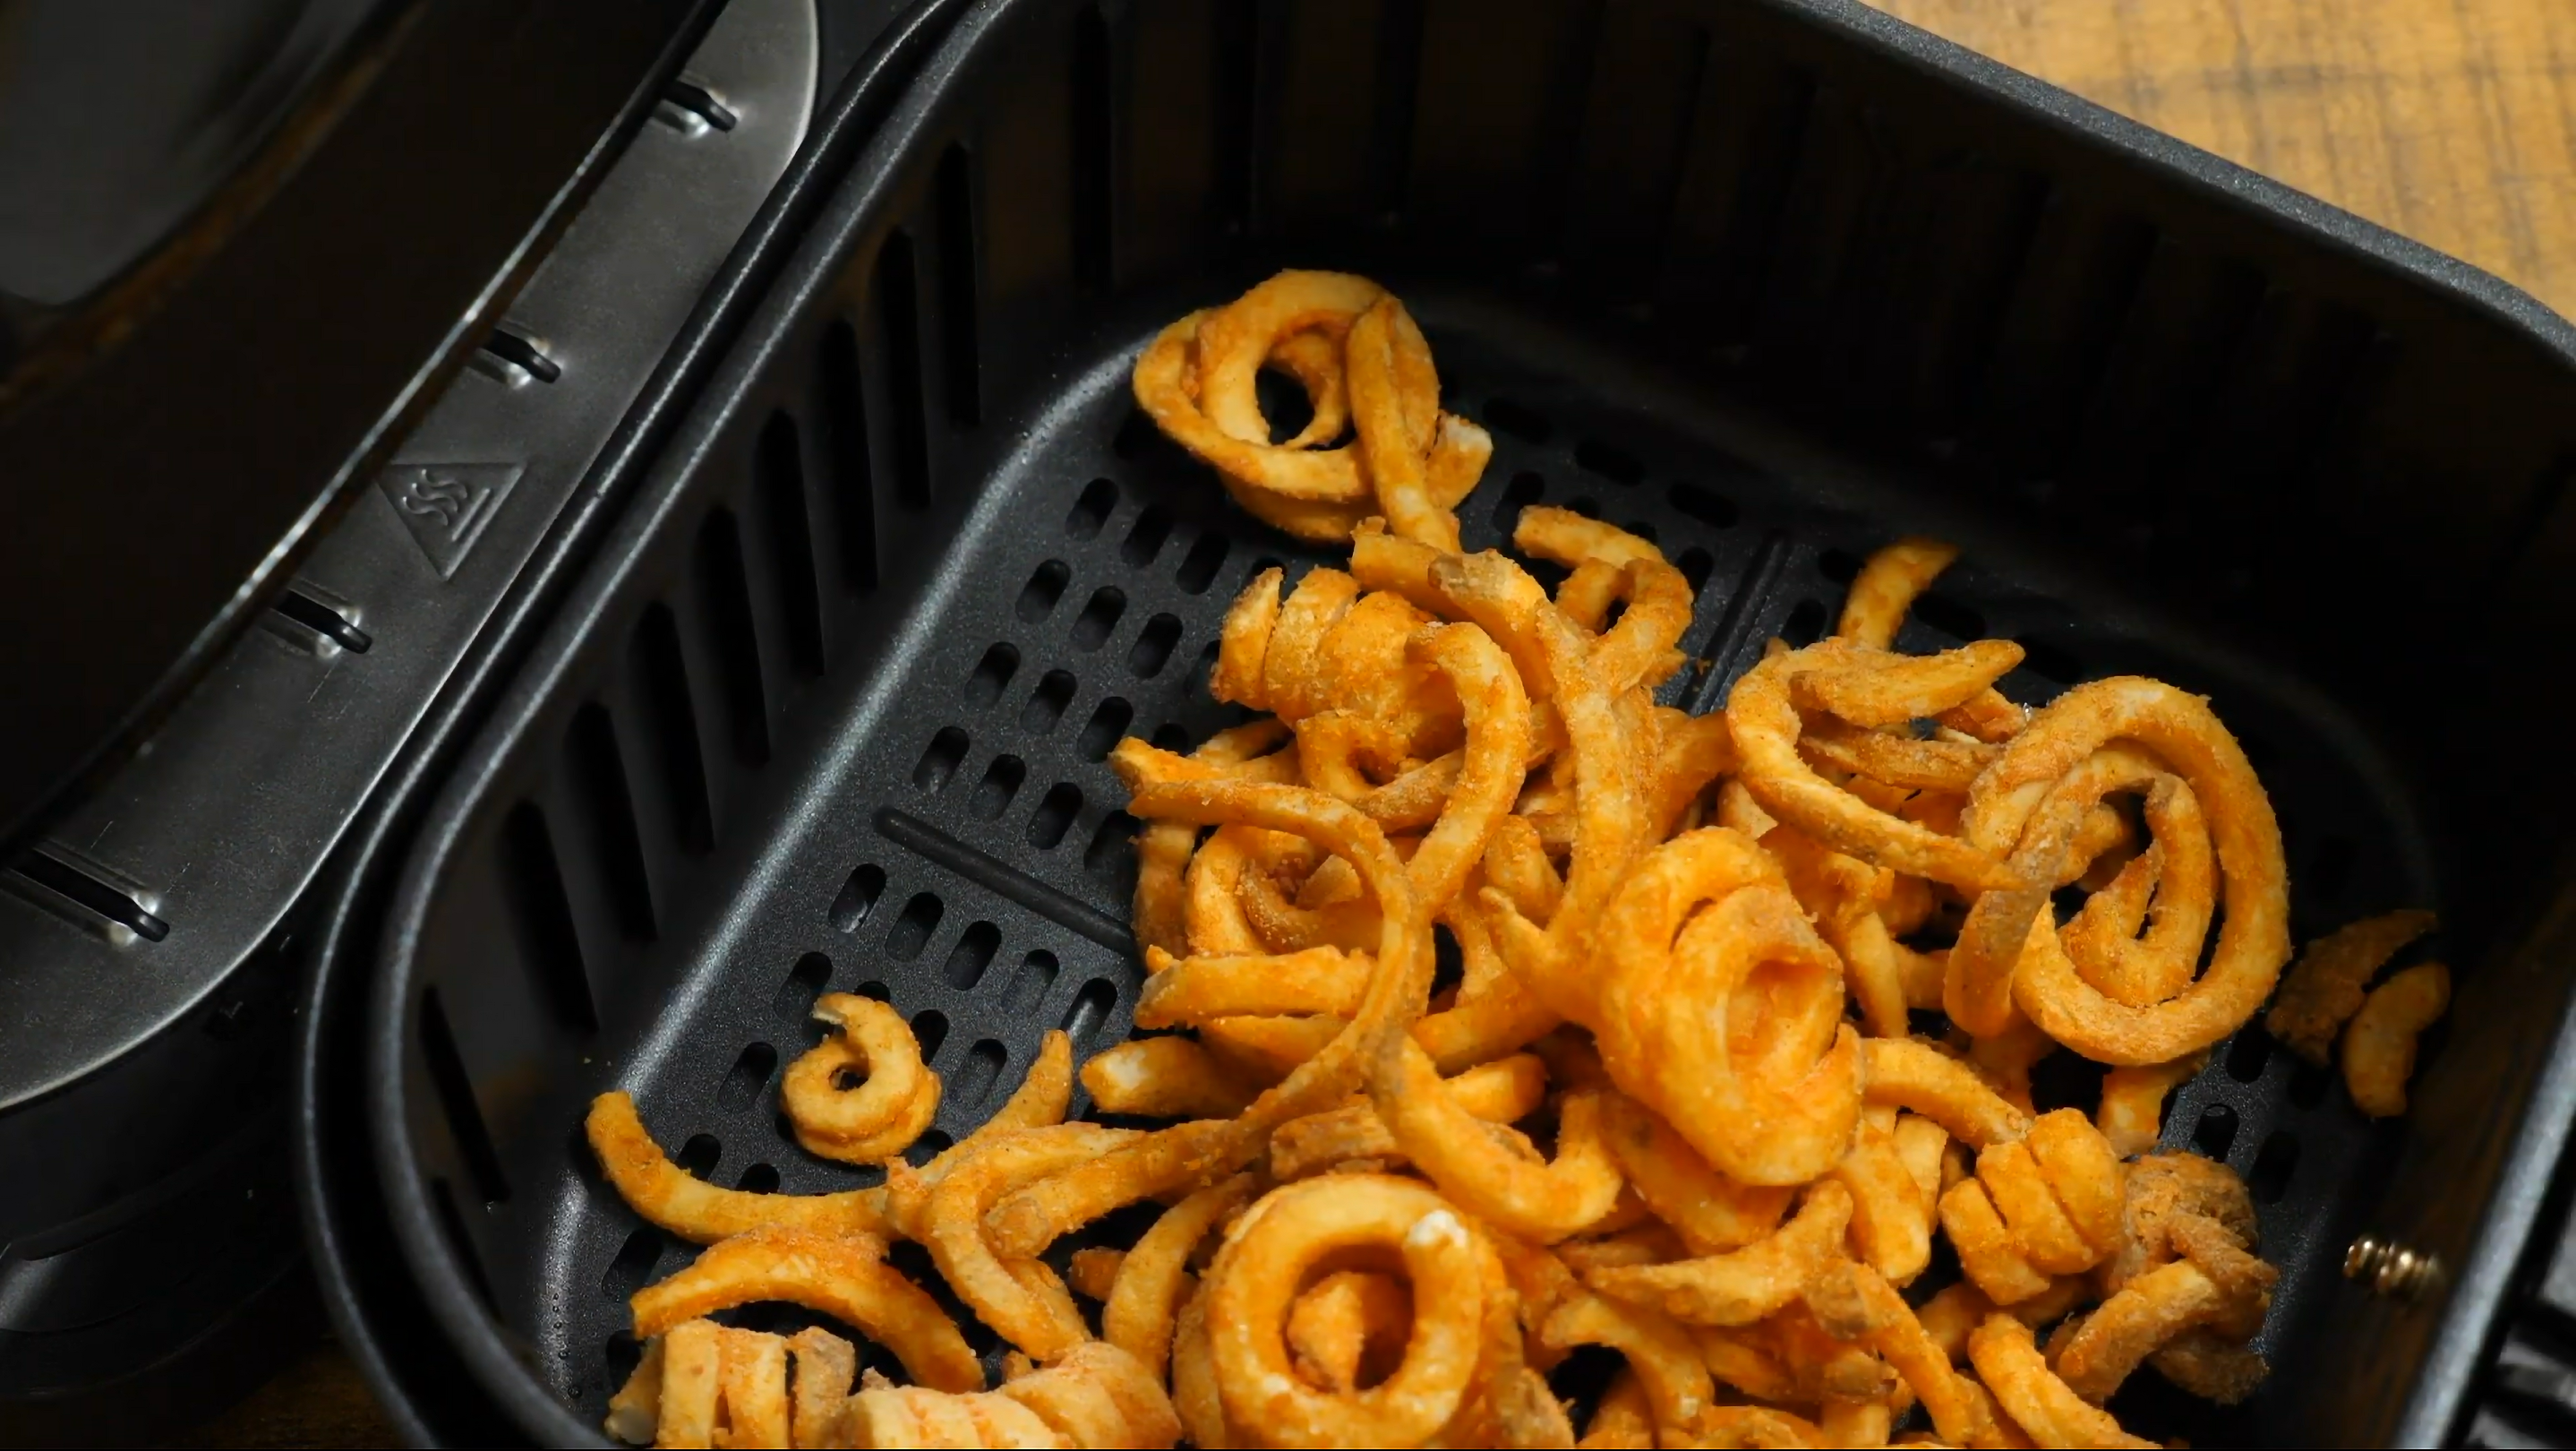 Arby's Curly Fries Air Fryer